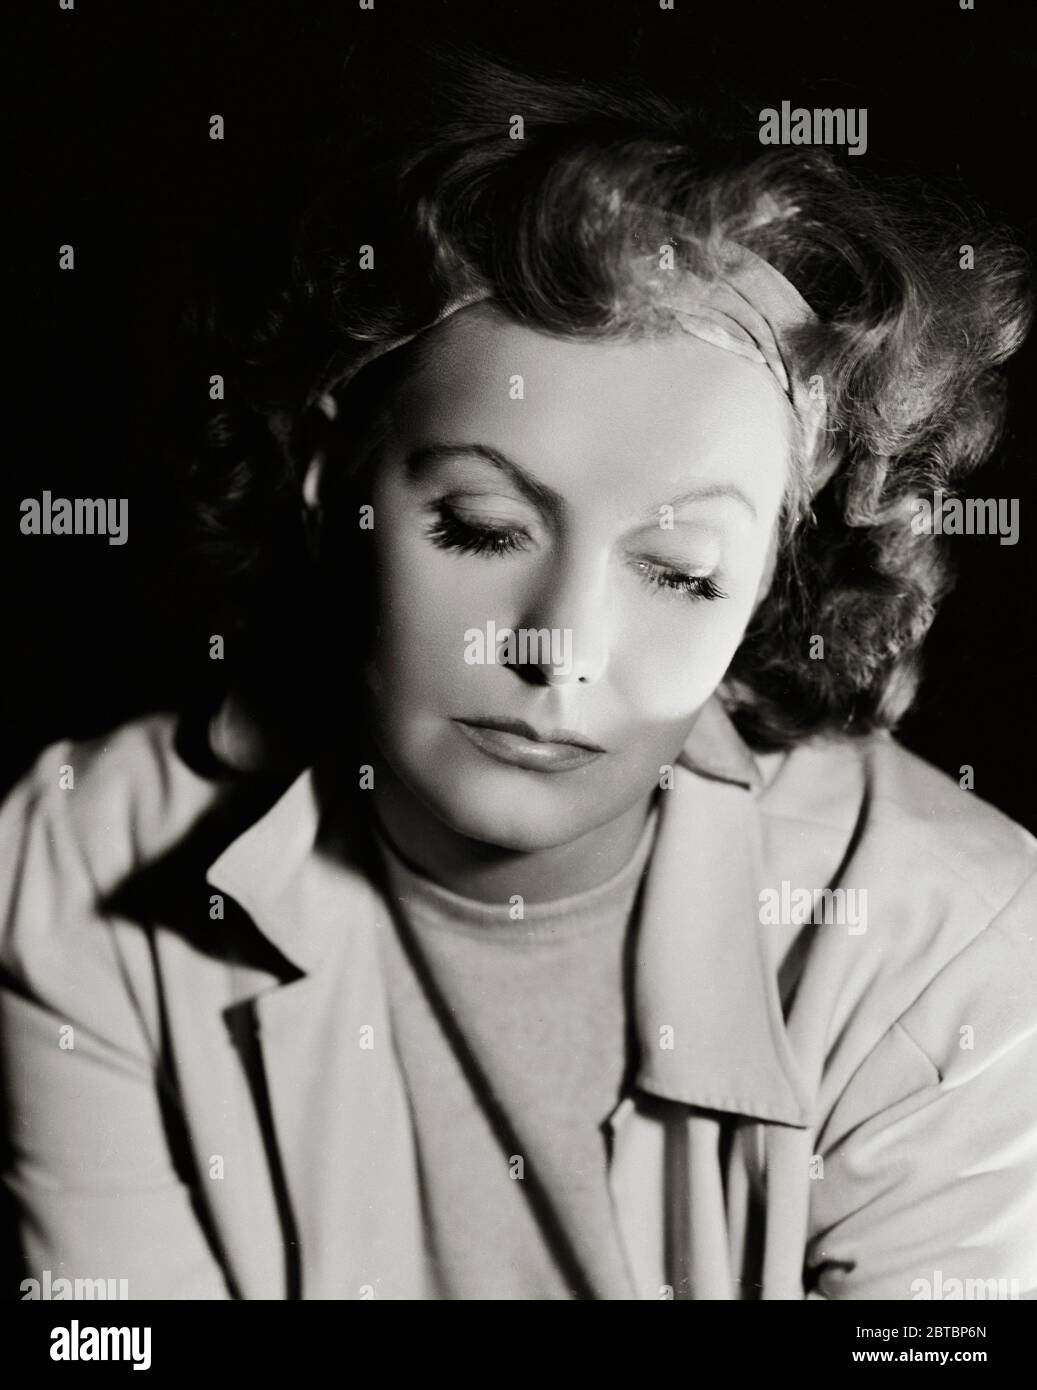 Swedish-born actress Greta Garbo (Retrospective), (born on September 18, 1905, died on April 15 ,1990 at aged 84) circa 1941.  Photo by Clarence Sinclair Bull / File Reference # 34000-067THA Stock Photo